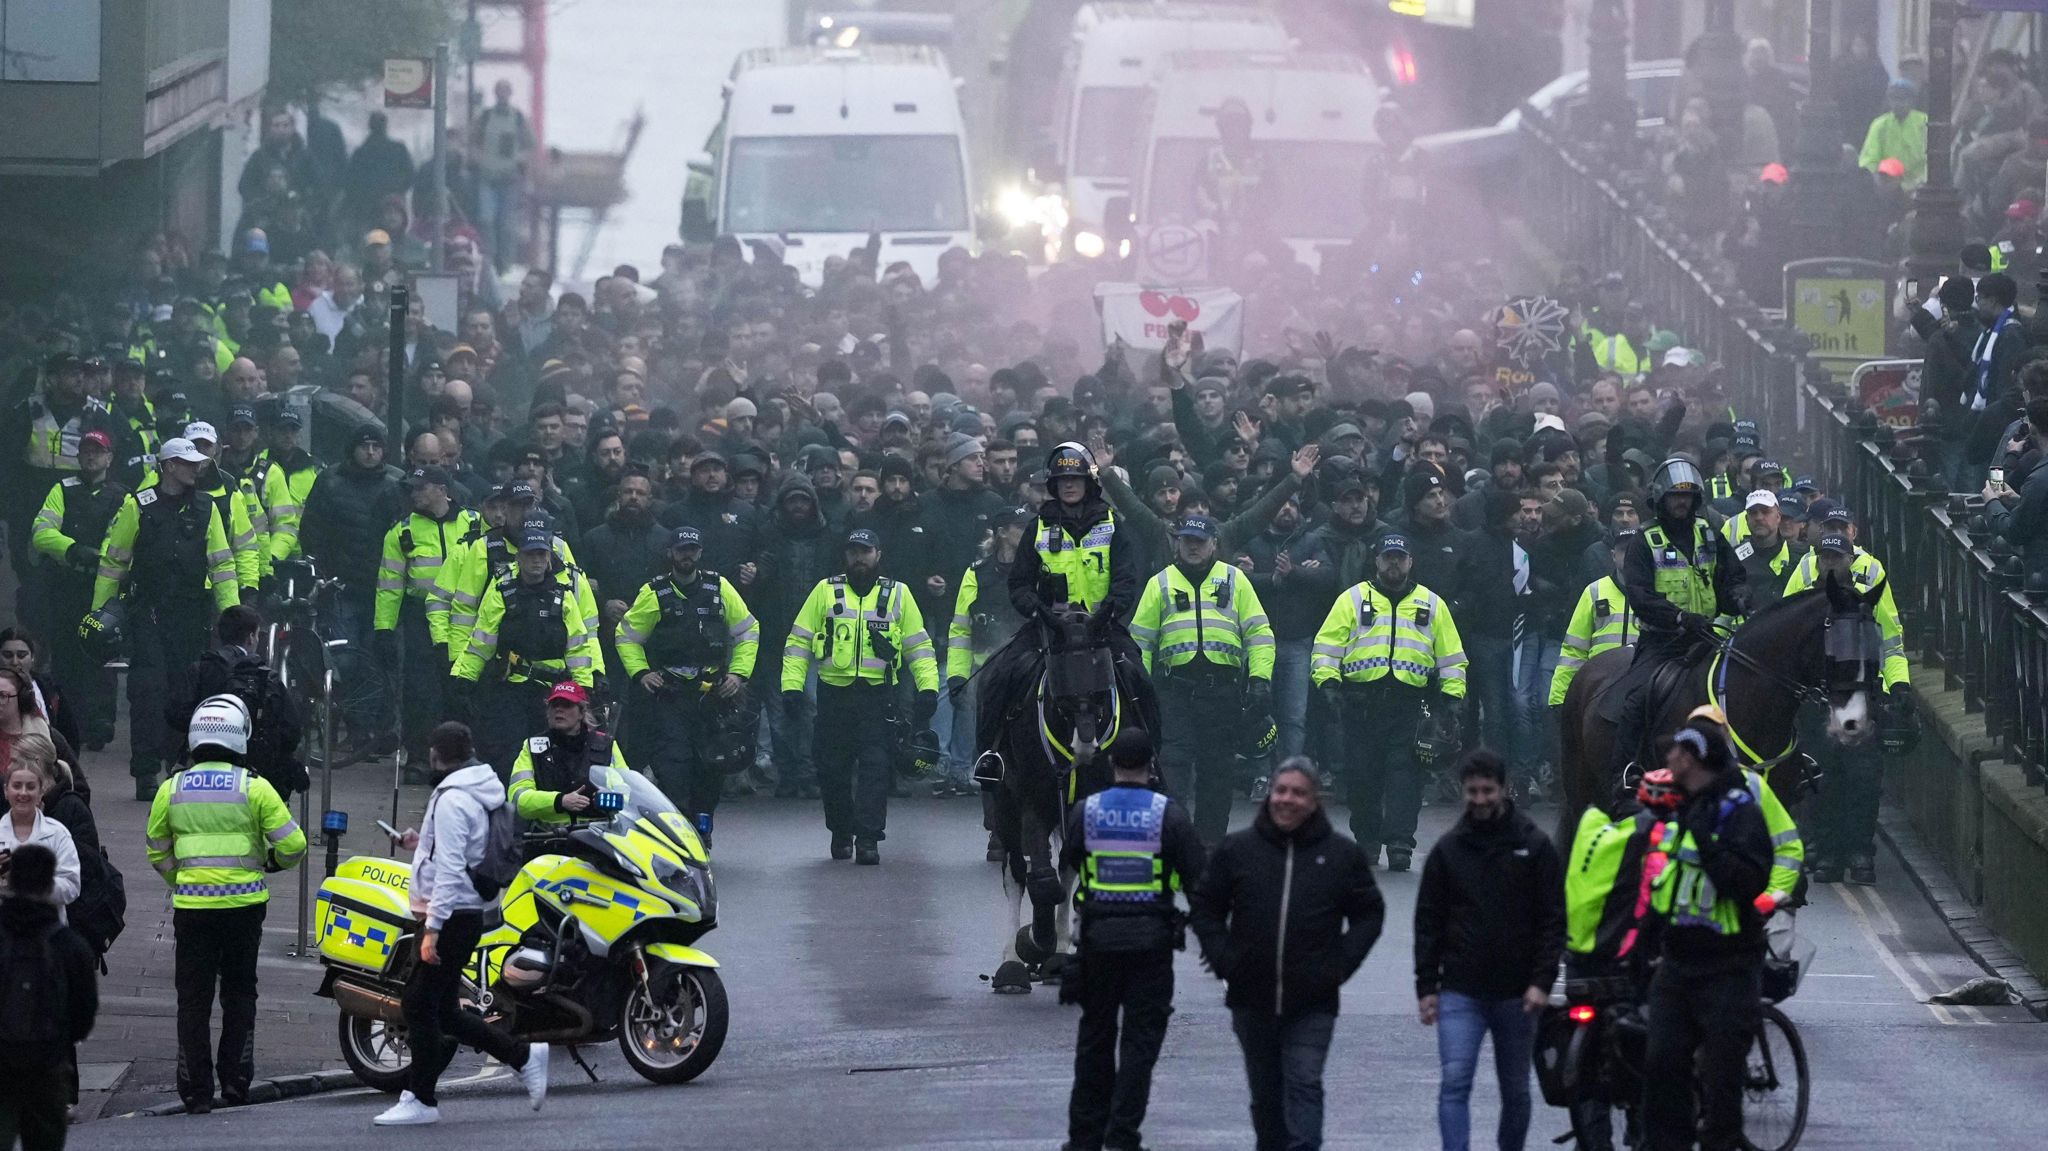 Roma supporters being escorted to the match in Brighton